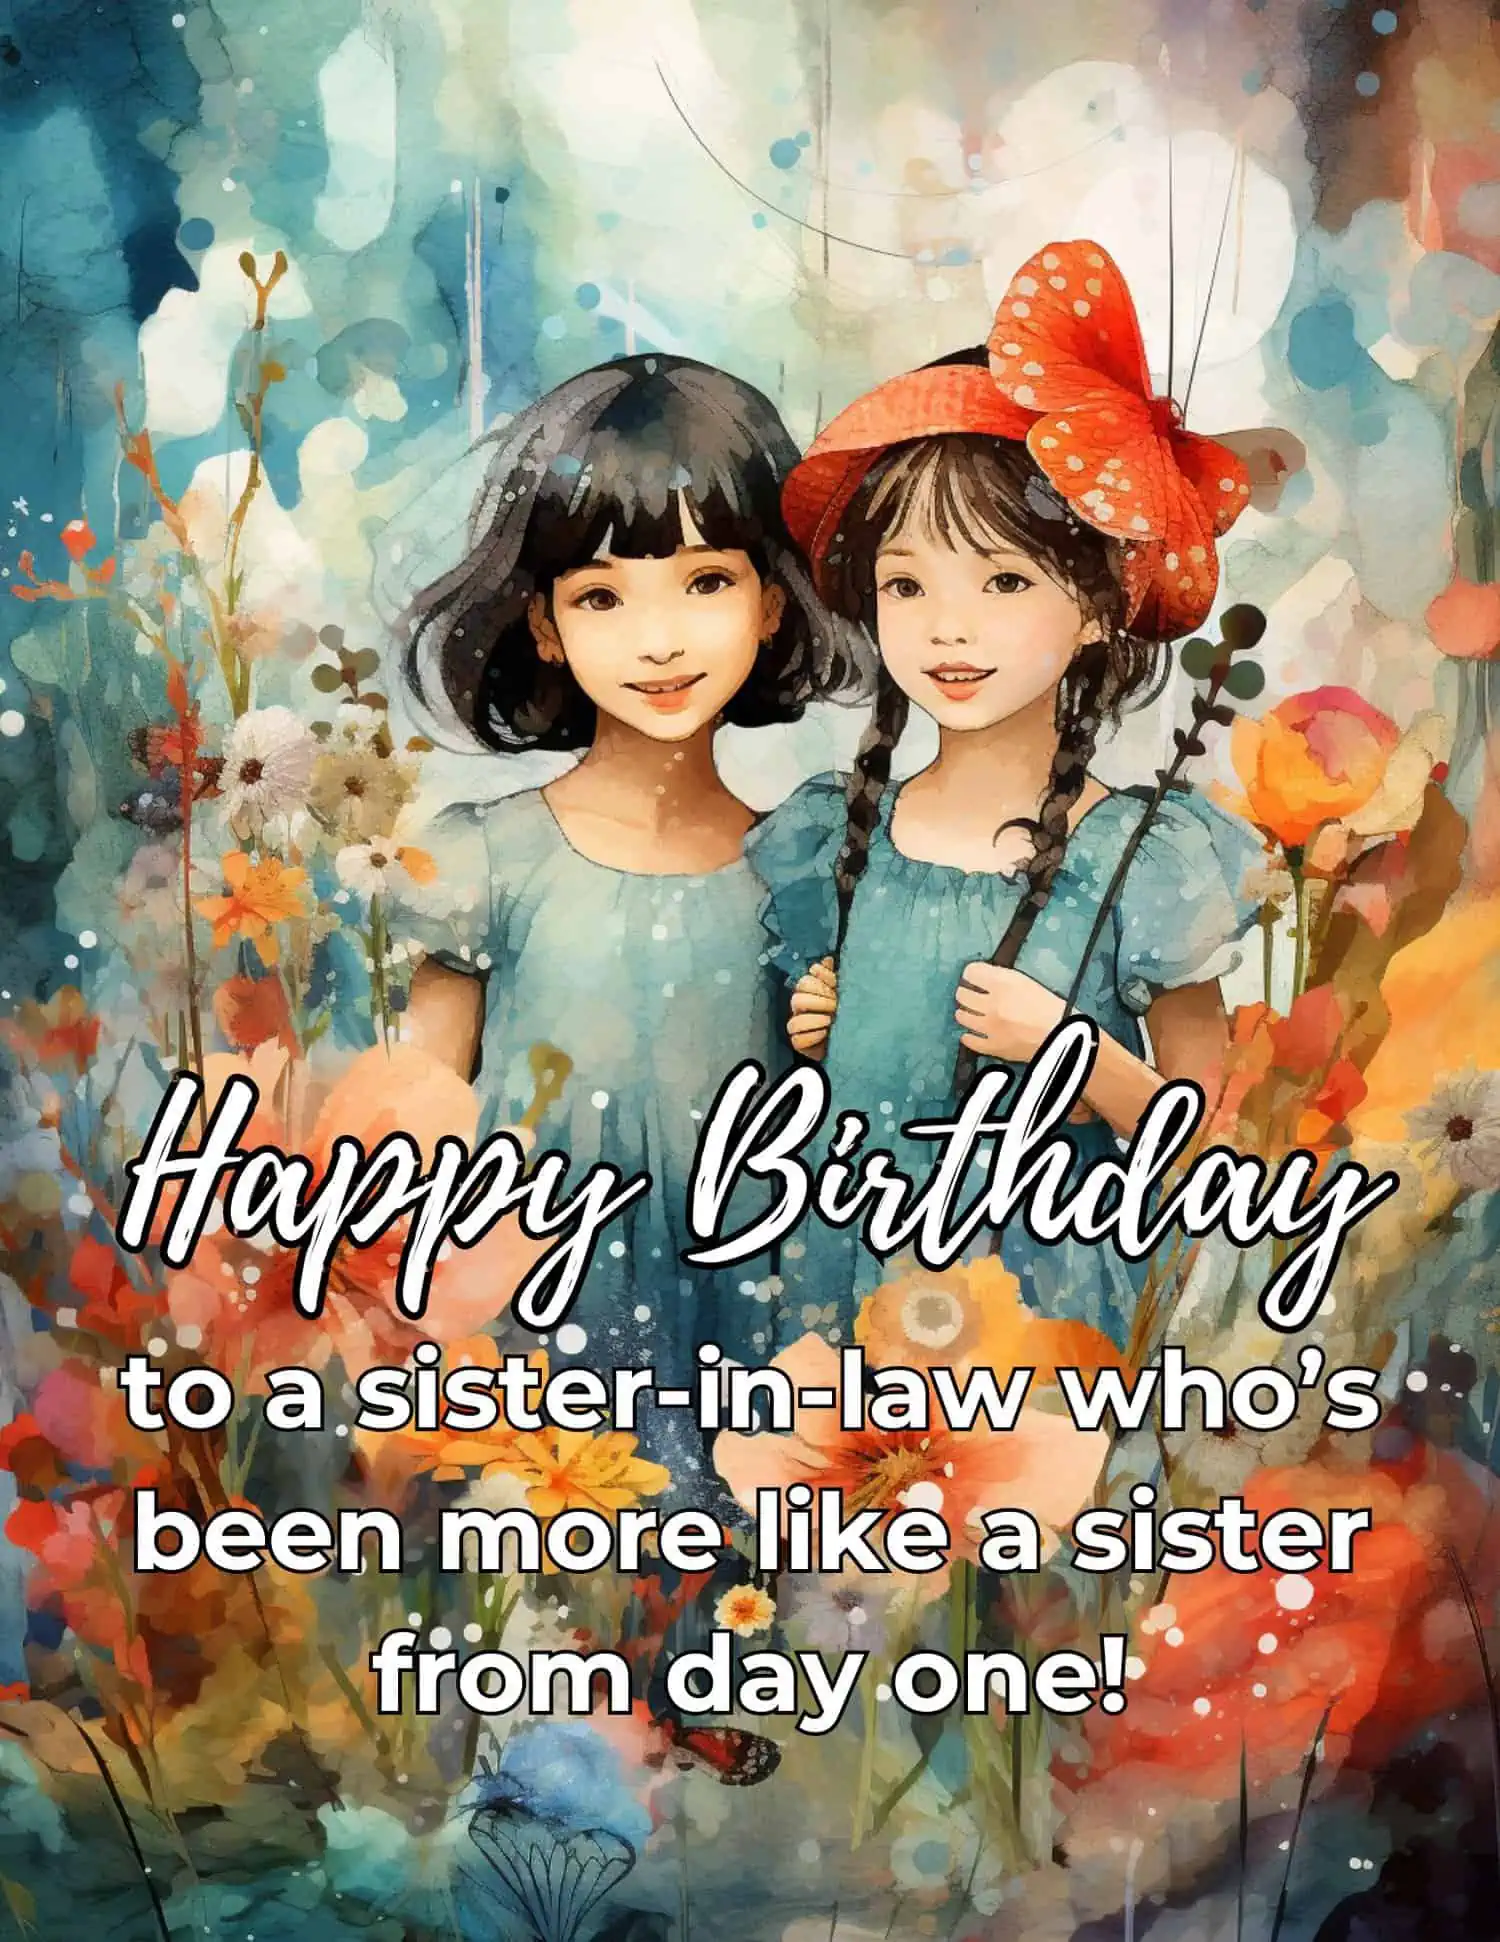 A series of thoughtful and heartfelt birthday messages dedicated to sisters-in-law.